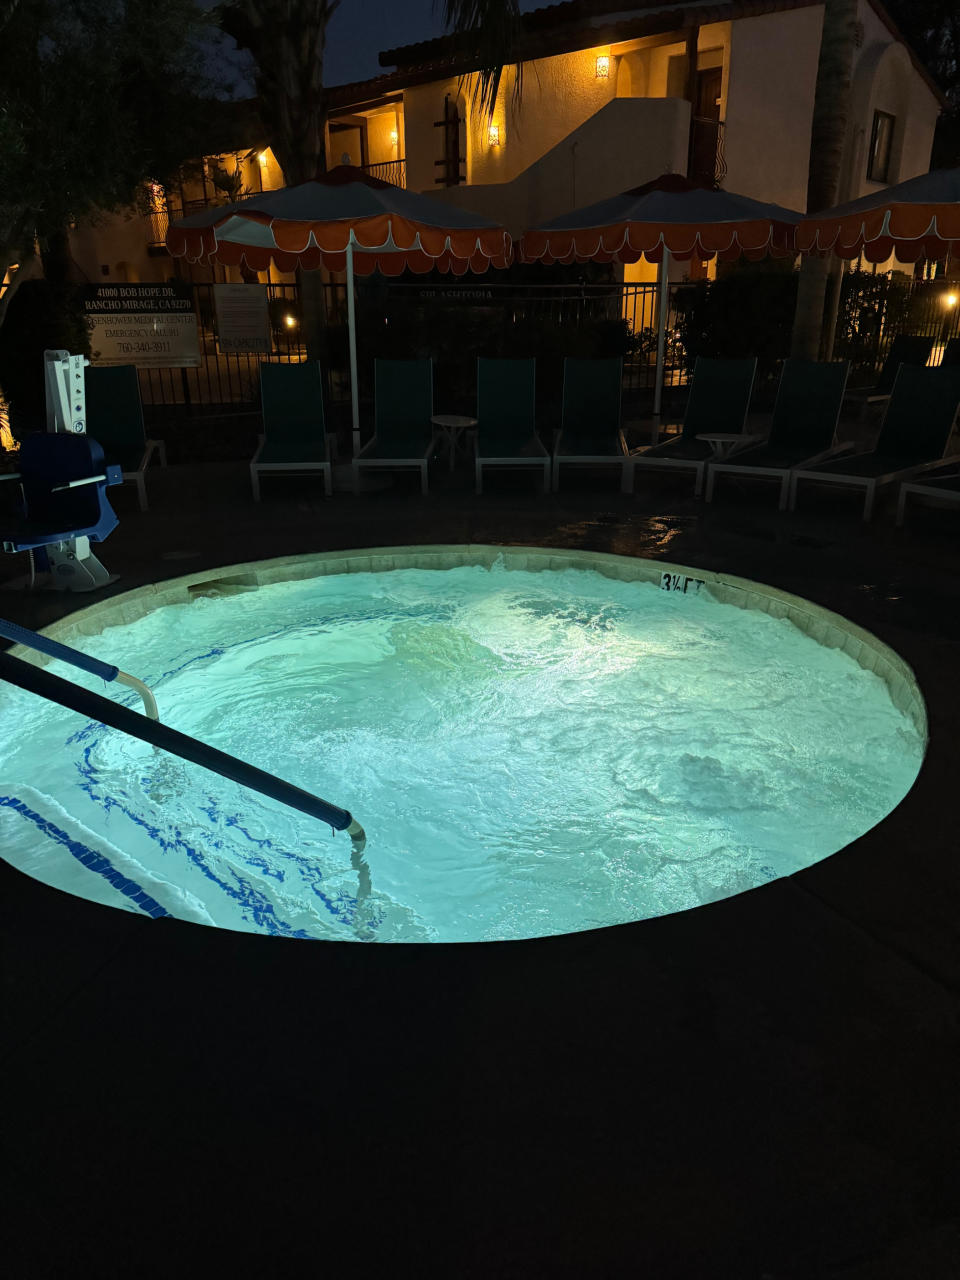 Nighttime setting of an outdoor hot tub with steam, surrounded by reclining chairs and pool umbrellas